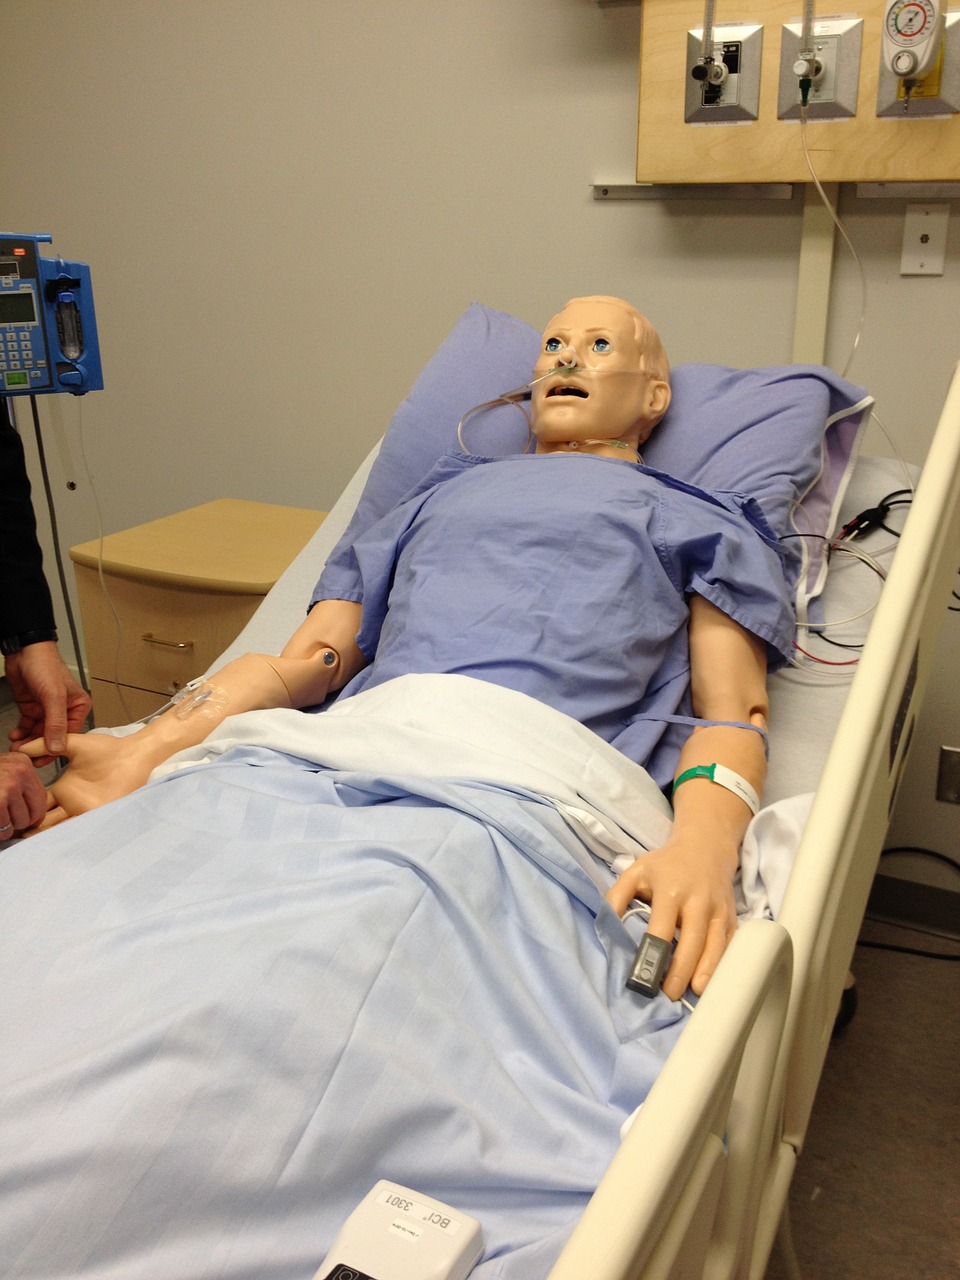 cpr dummy medical free photo